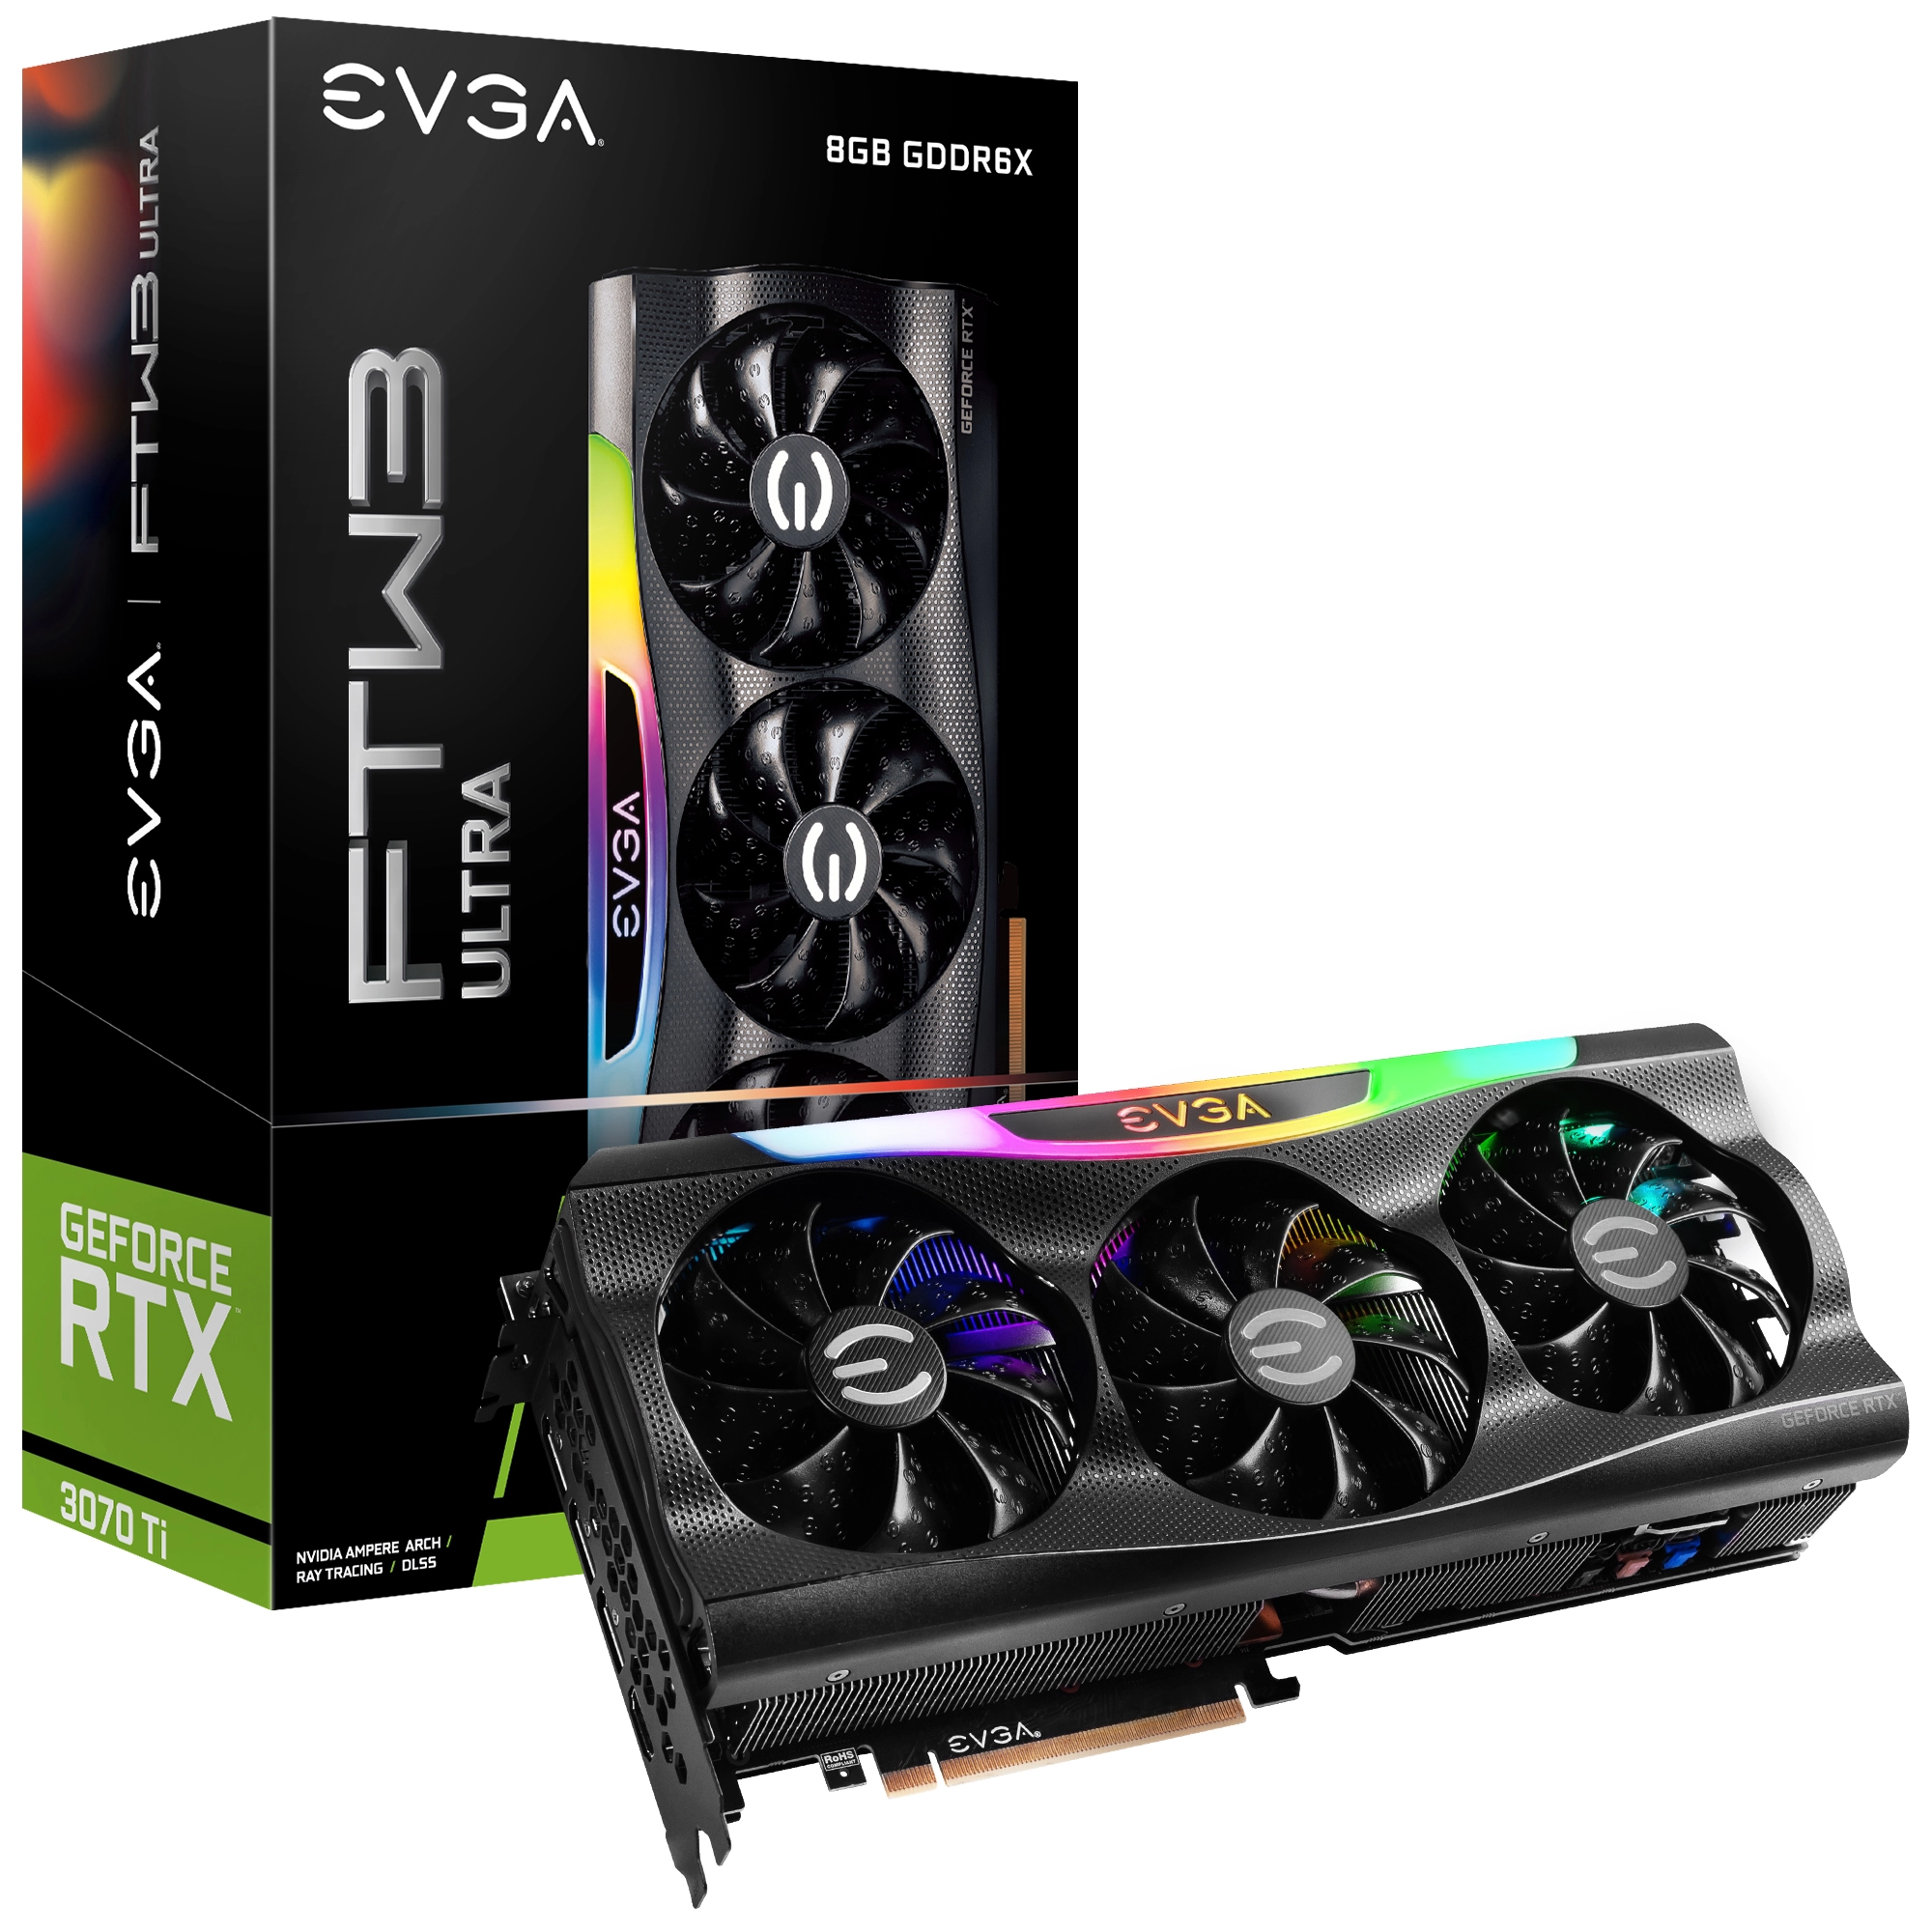 EVGA GeForce RTX 3070 Ti FTW3 ULTRA GAMING Package